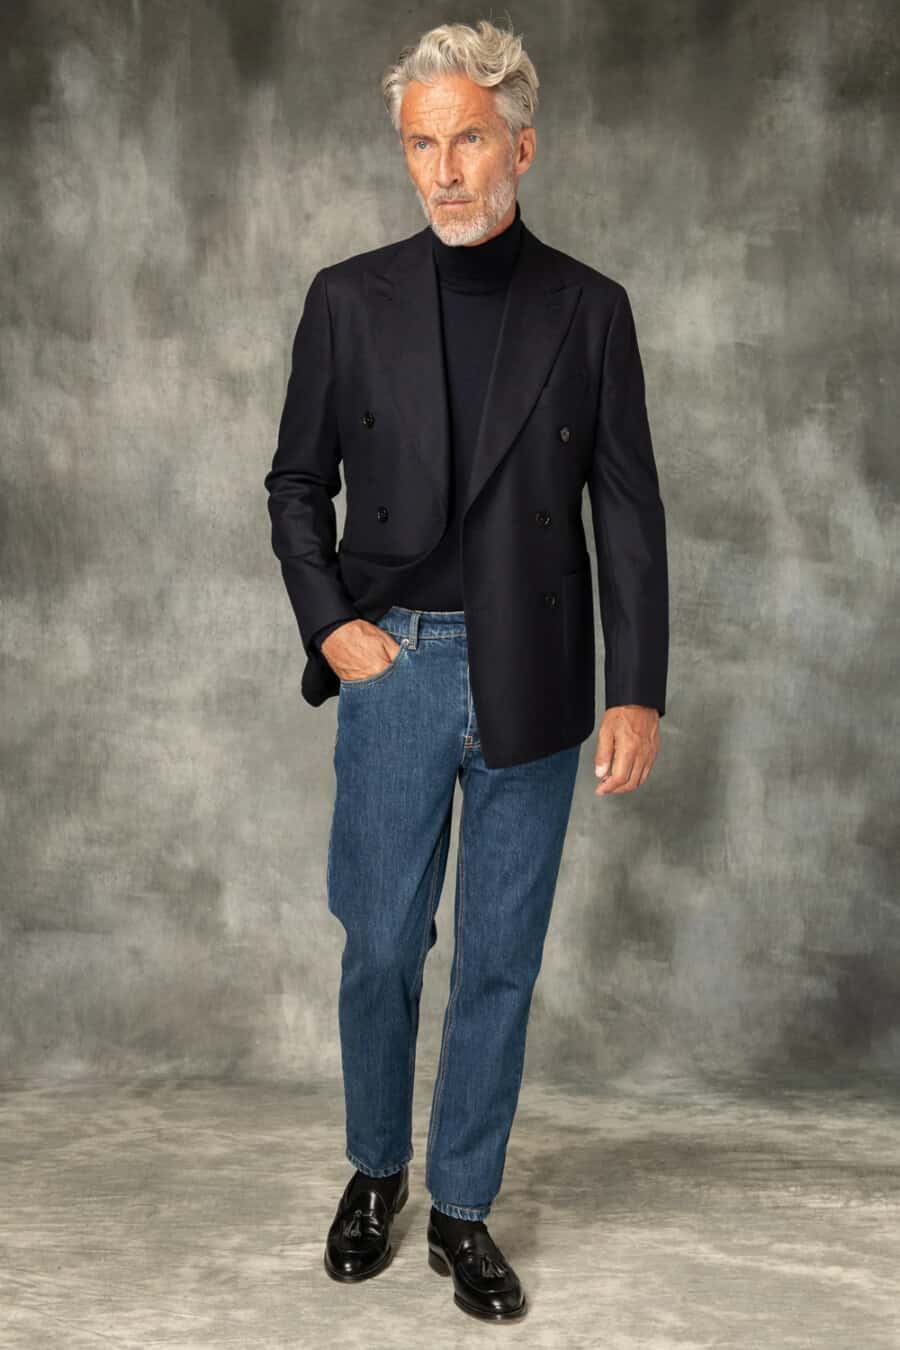 Men's navy double-breasted blazer, mid-wash jeans, navy turtleneck and black leather tassel loafers outfit